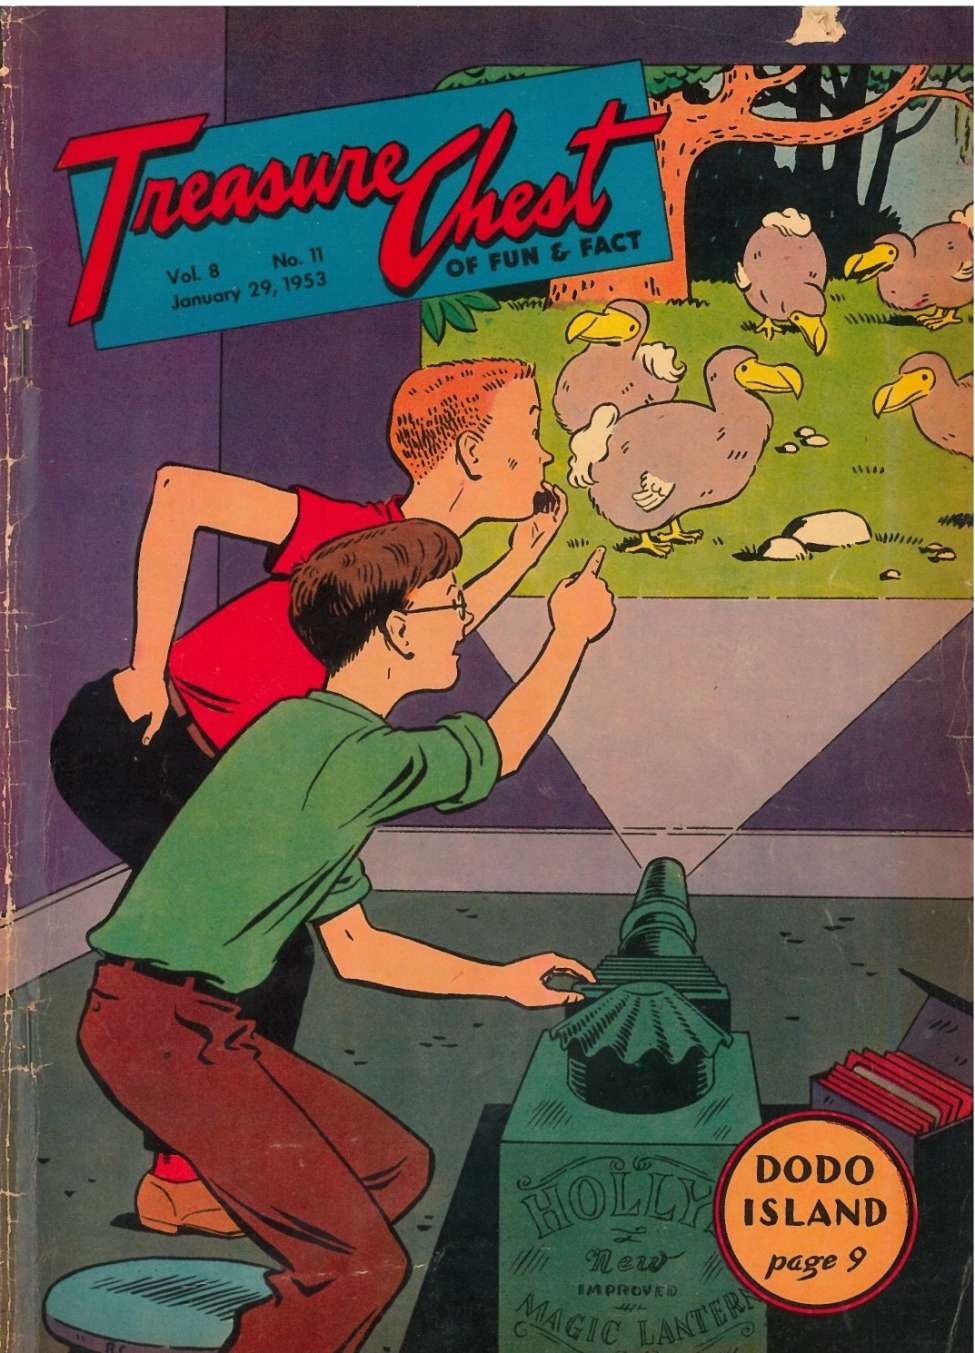 Comic Book Cover For Treasure Chest of Fun and Fact v8 11